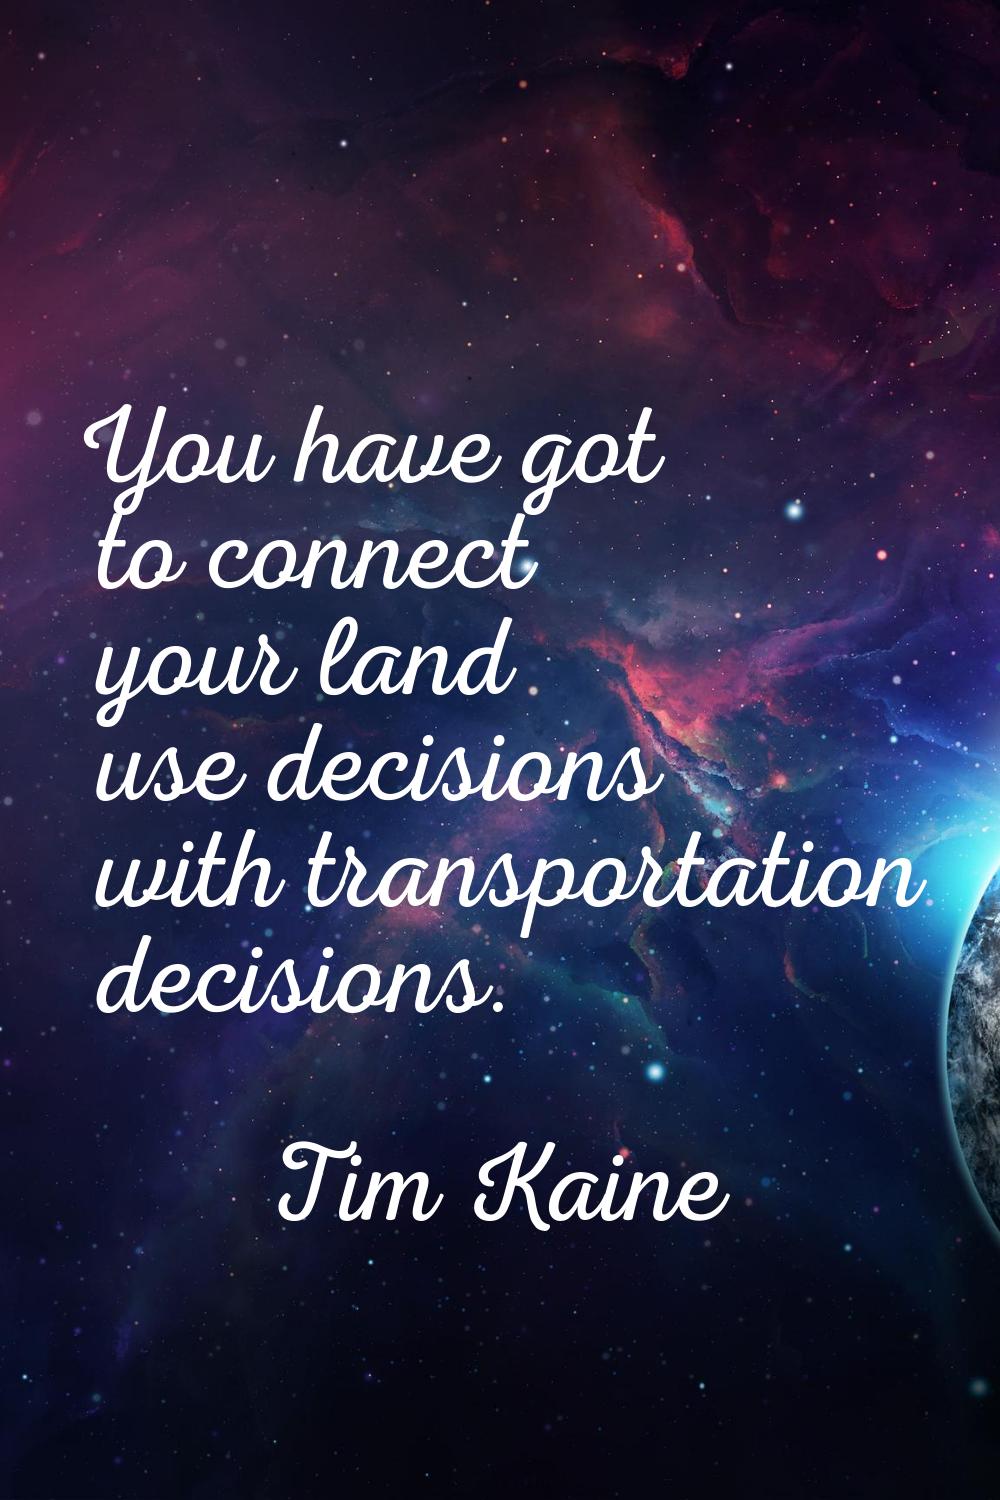 You have got to connect your land use decisions with transportation decisions.